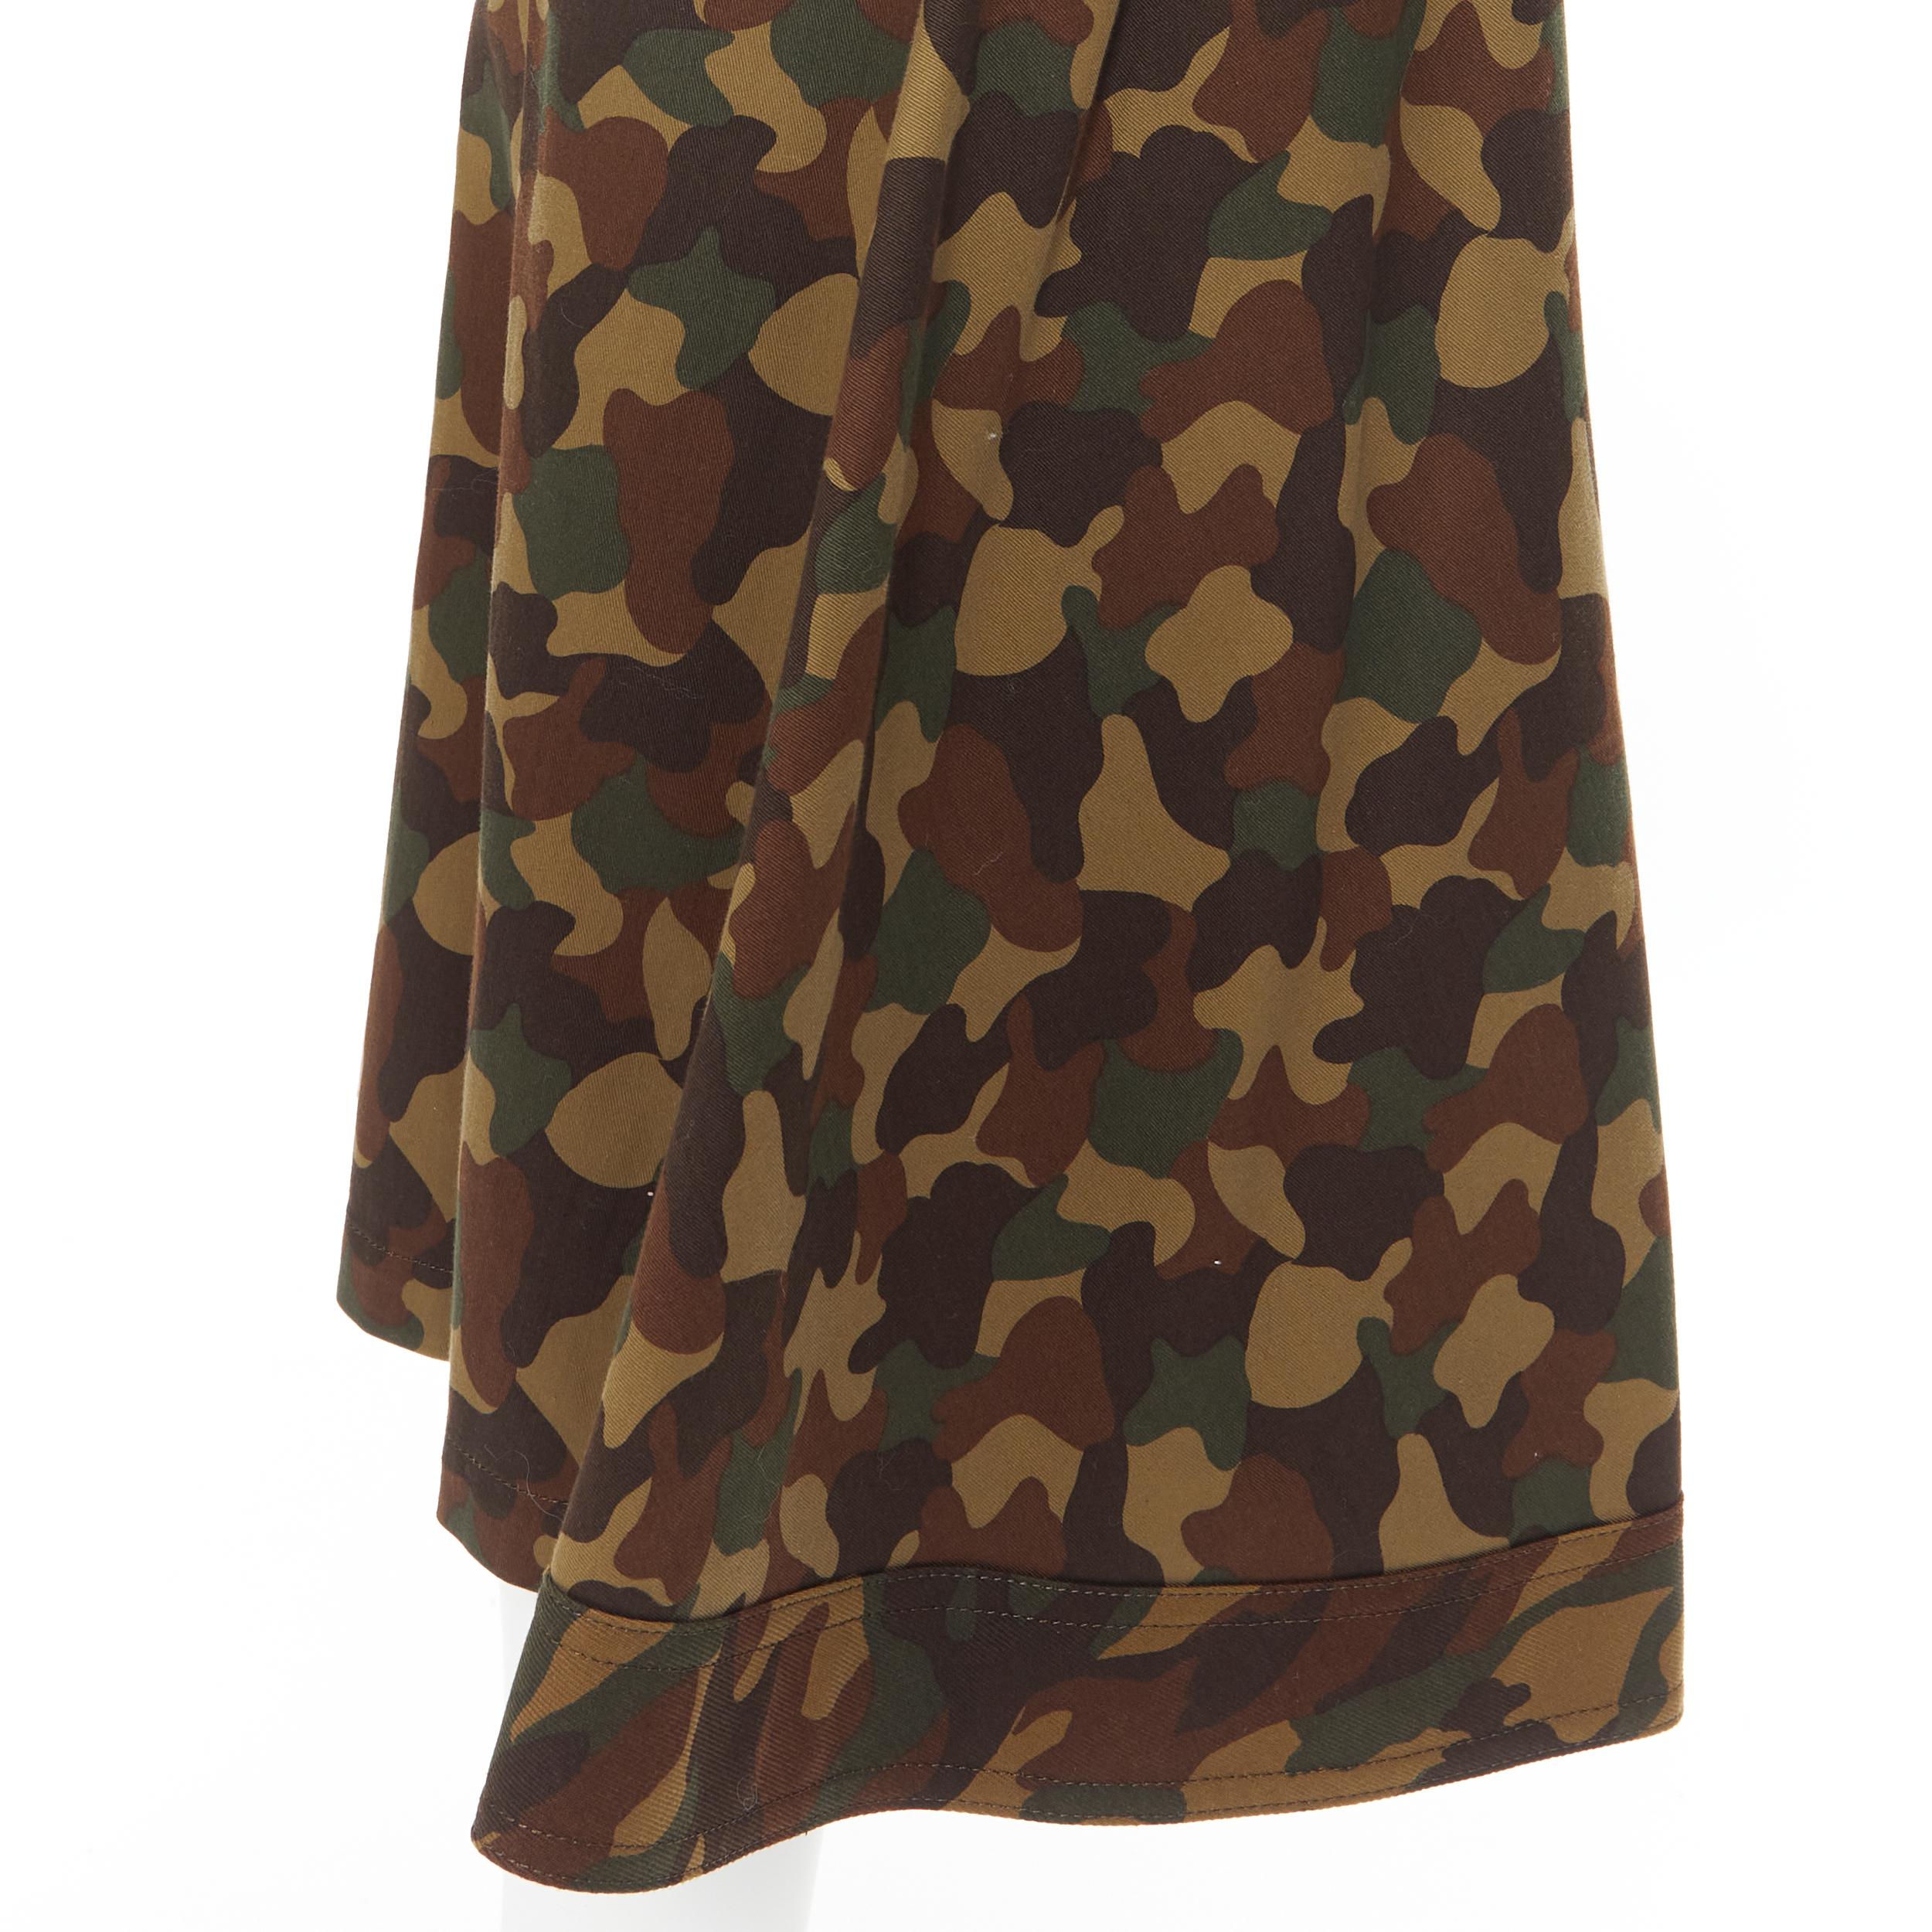 YOHJI YAMAMOTO convertible green camouflage print culotte shorts skirt JP1 S 
Reference: ANSN/A00199 
Brand: Yohji Yamamoto 
Material: Cotton 
Color: Green 
Pattern: Camouflage 
Extra Detail: Convertible from skirt to culotte shorts. Worn as pencil